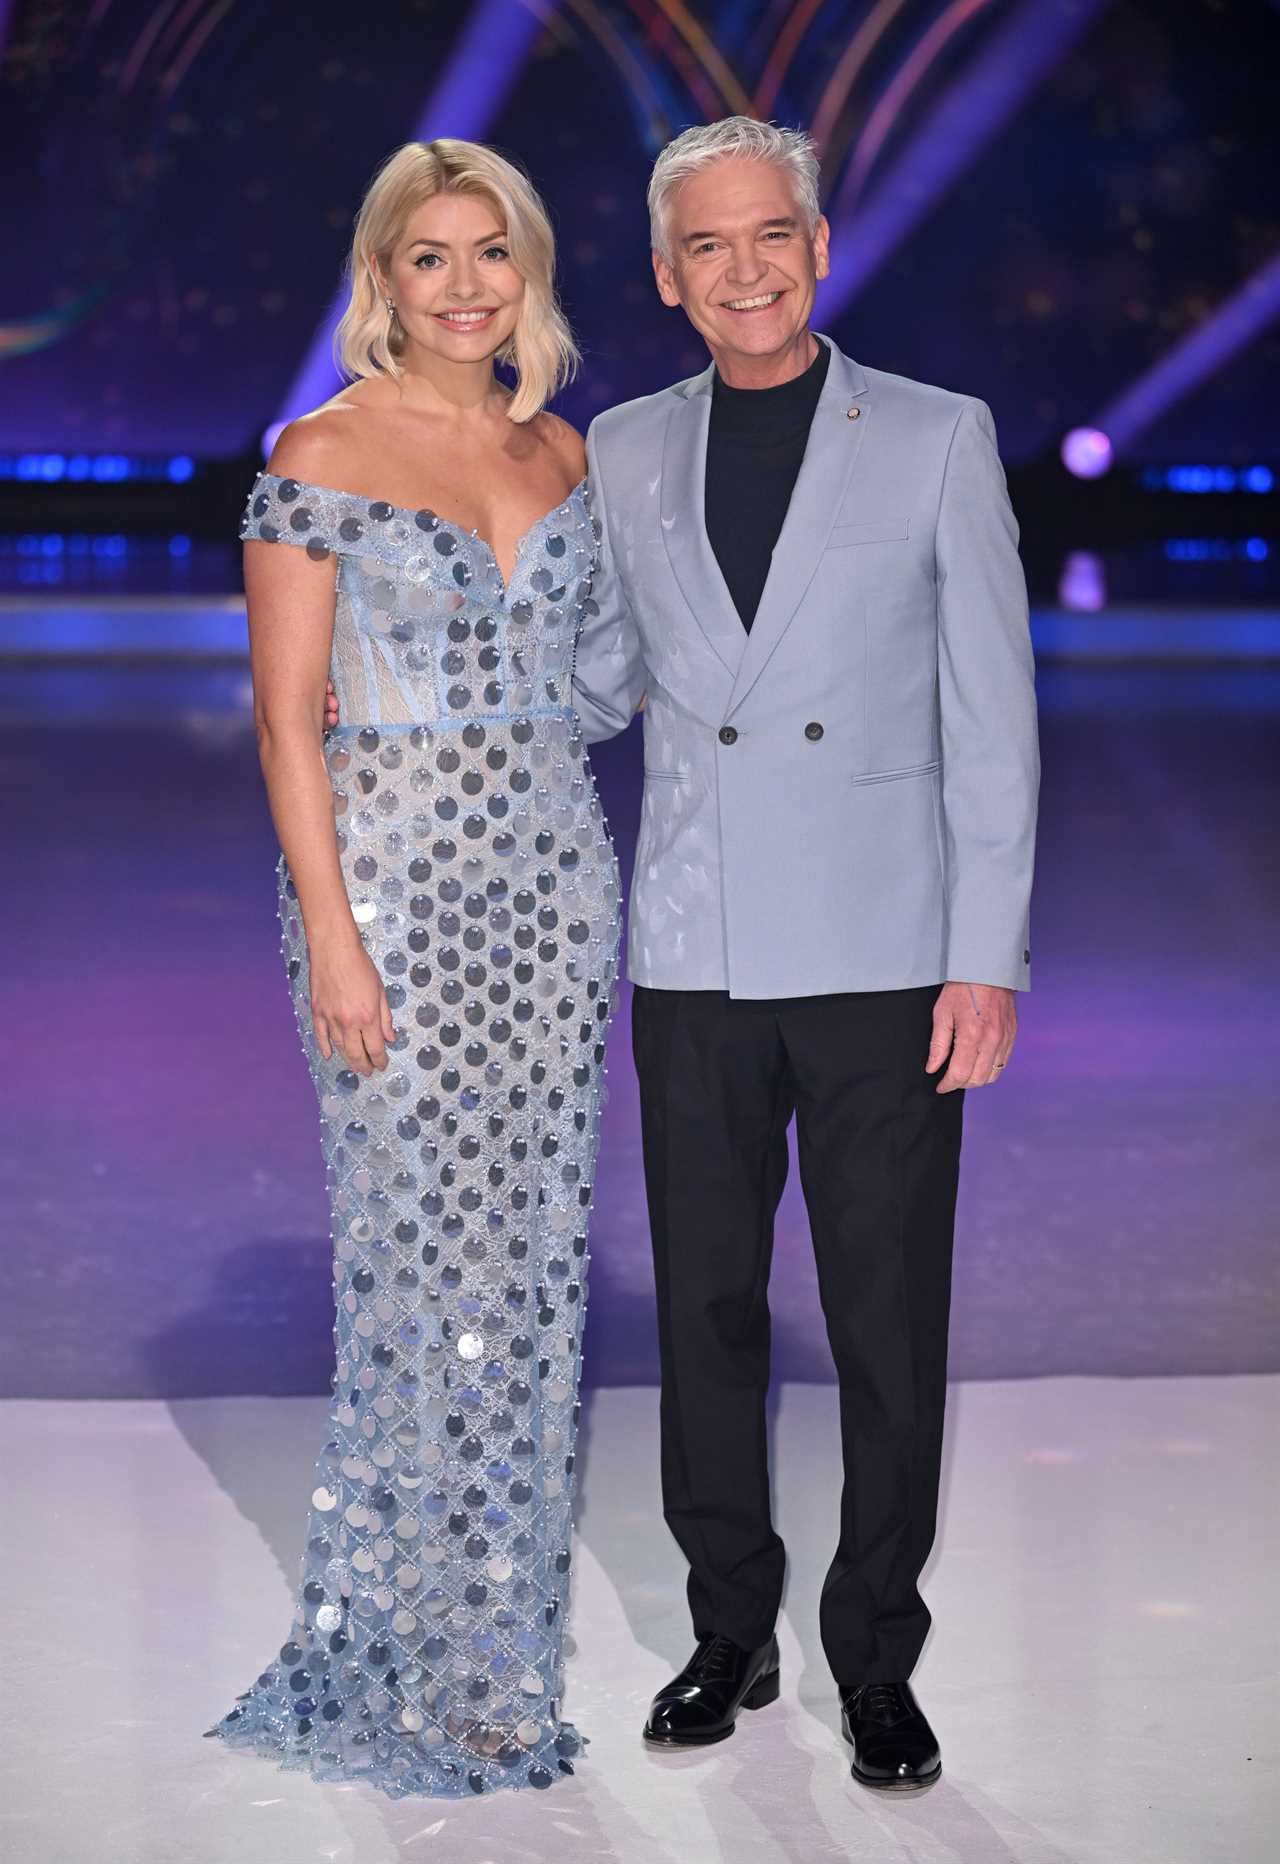 Holly Willoughby looks stunning in plunging ballgown as she returns to host Dancing on Ice